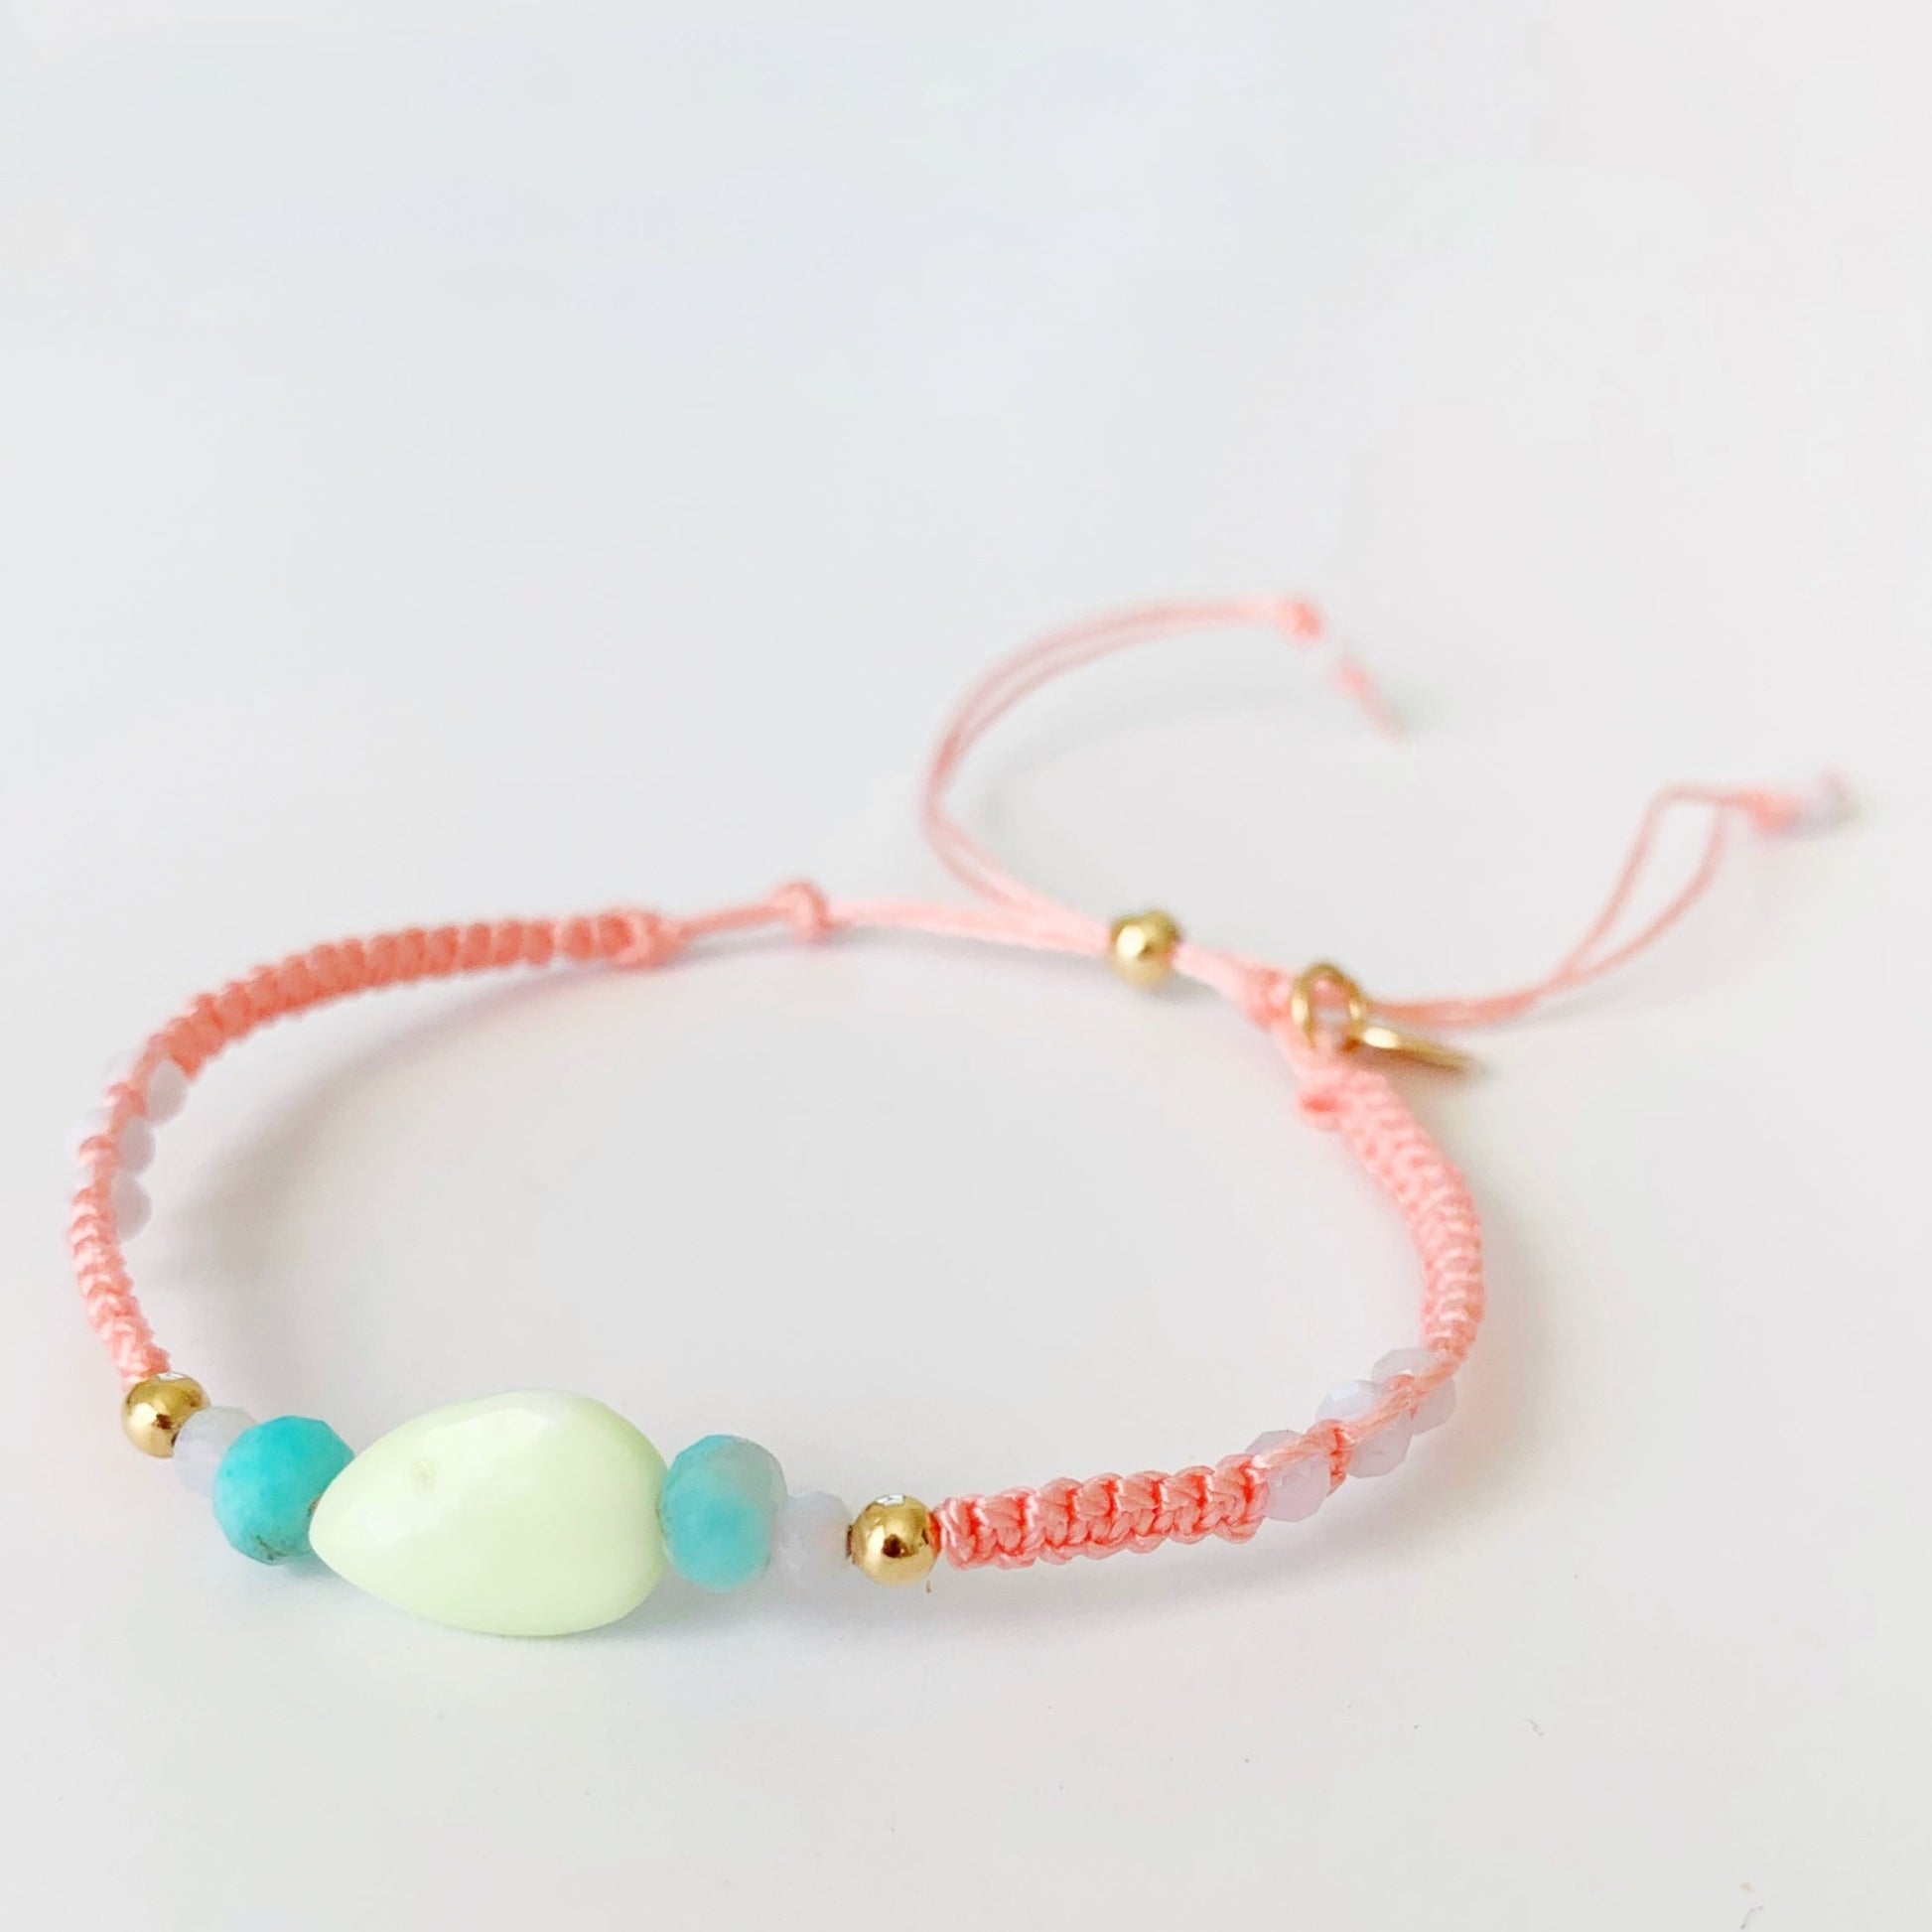 Mermaids and madeleines captiva macrame bracelet in color peach tropical smoothie features semiprecious beads at the center and 14k gold filled slide bead clasp. this bracelet is pictured on a white background